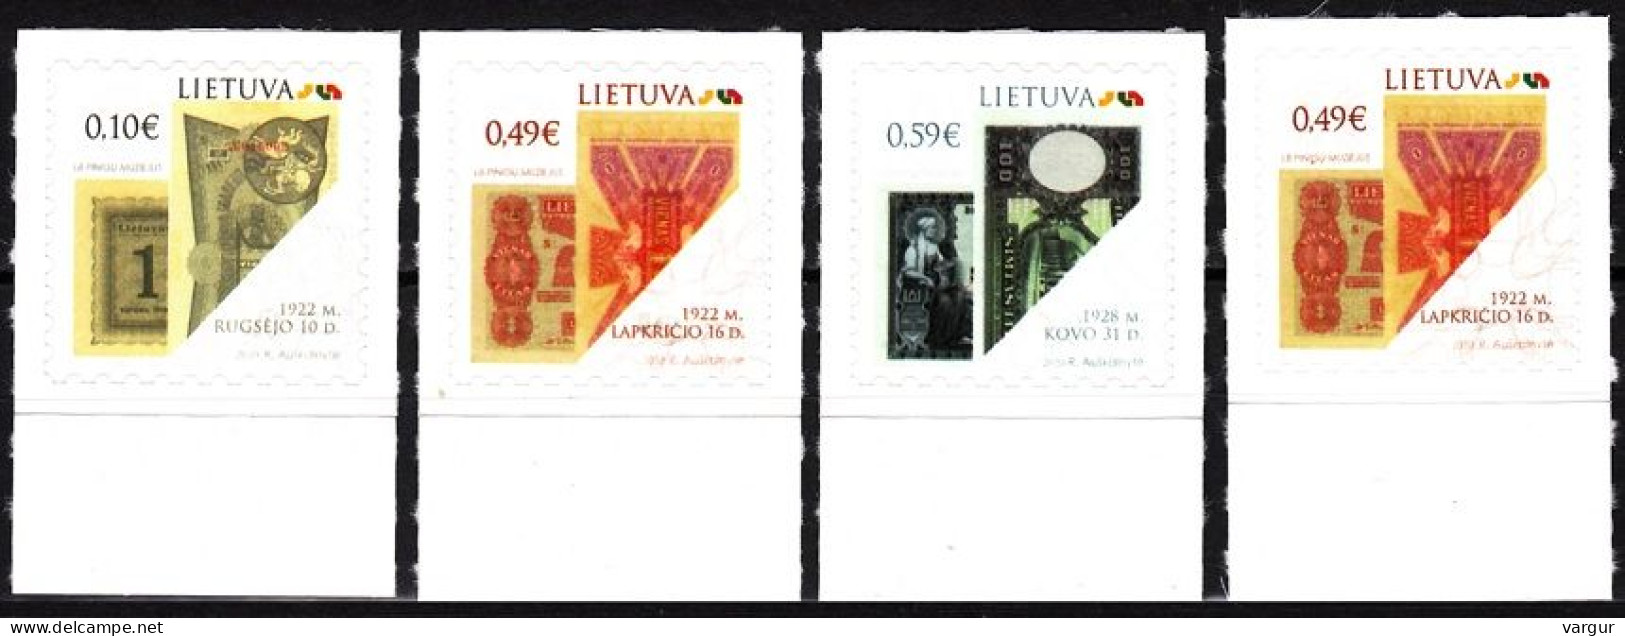 LITHUANIA 2020-01 Definitive: Historical Paper Money. With Variety 49c, Mint - Monnaies